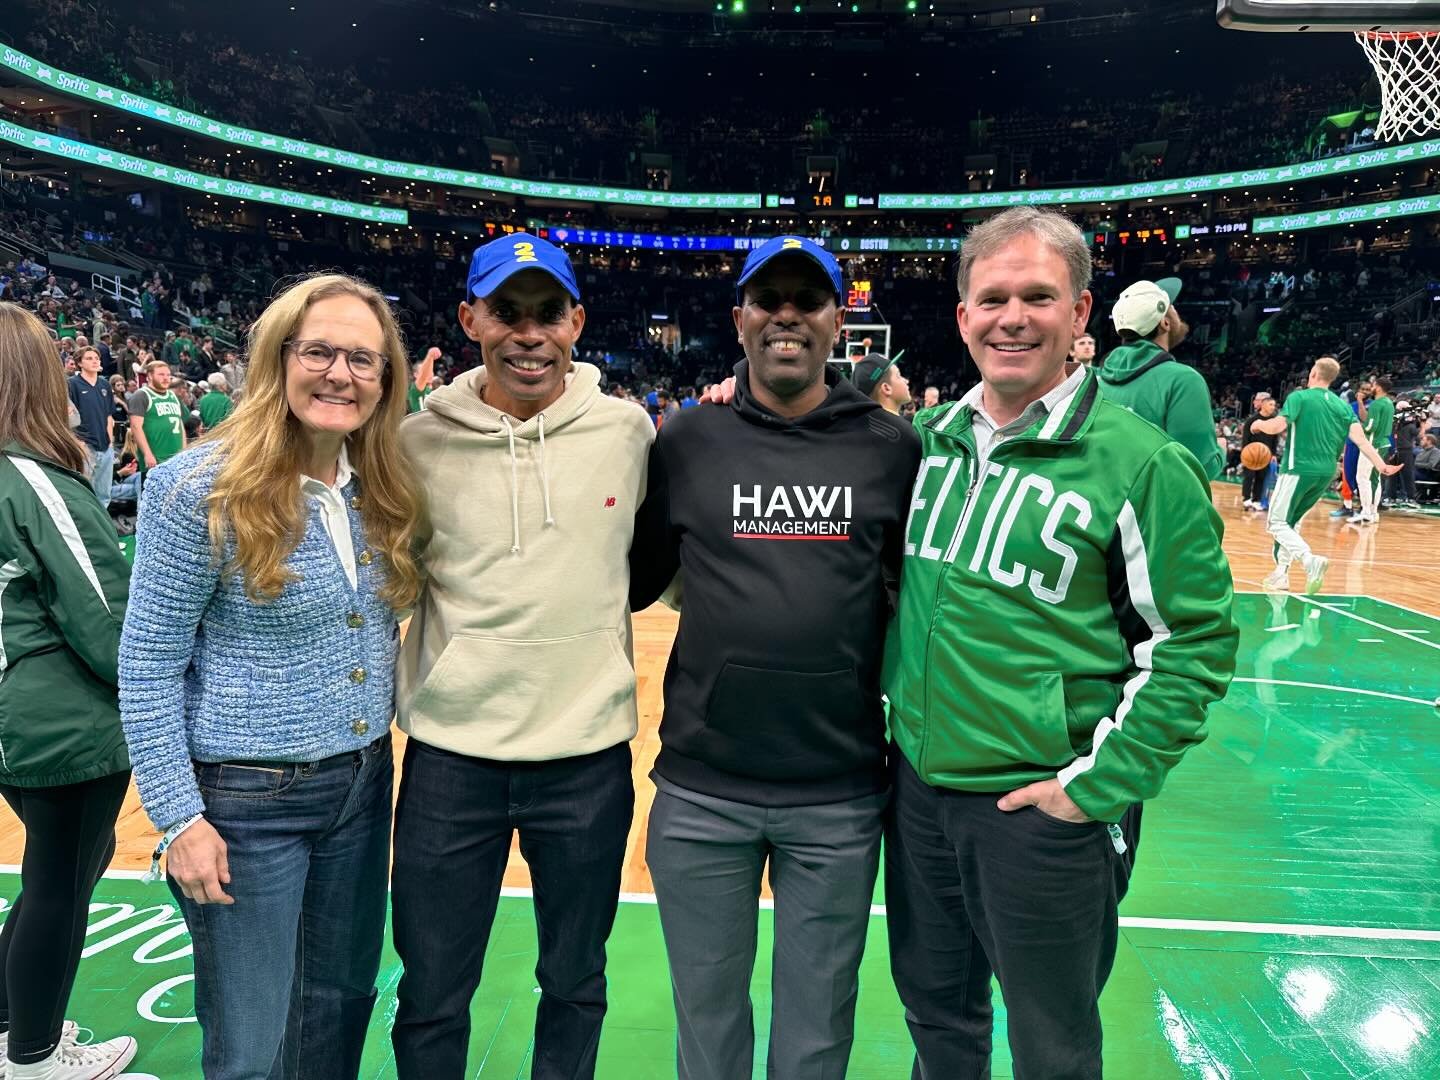 Had a fantastic time last night at the Garden. Thank you to the Celtics for the warm welcome and honor!